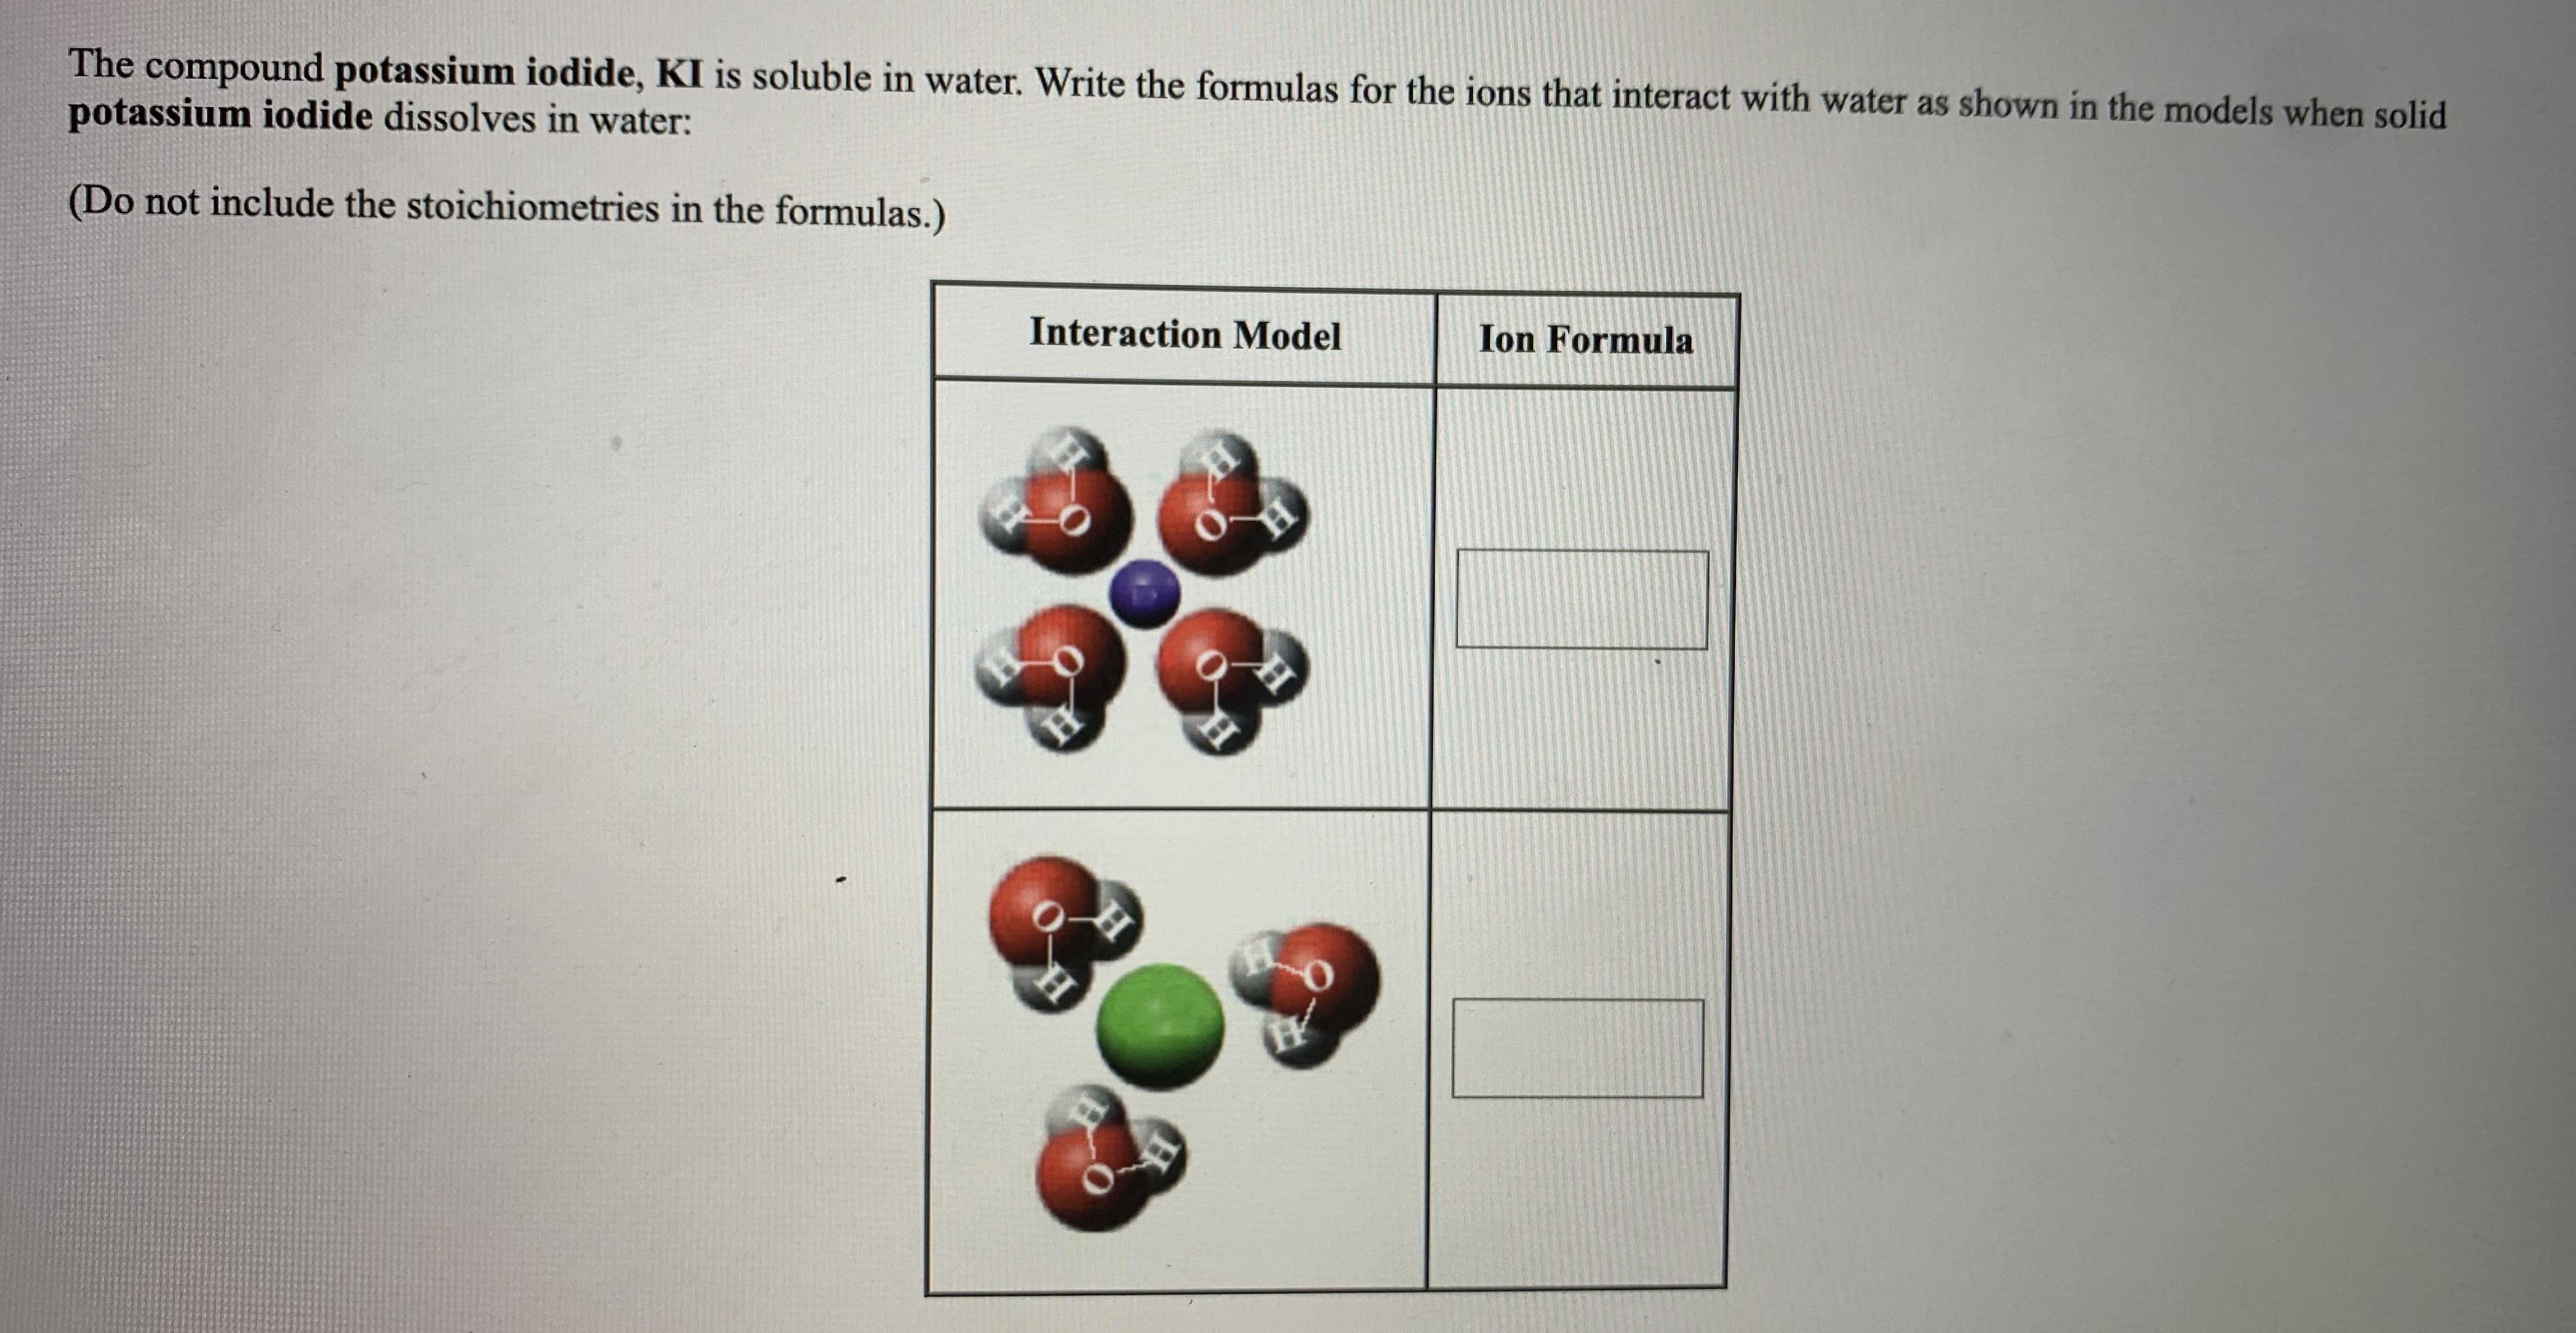 The compound potassium iodide, KI is soluble in water. Write the formulas for the ions that interact with water as shown in the models when solid
potassium iodide dissolves in water:
